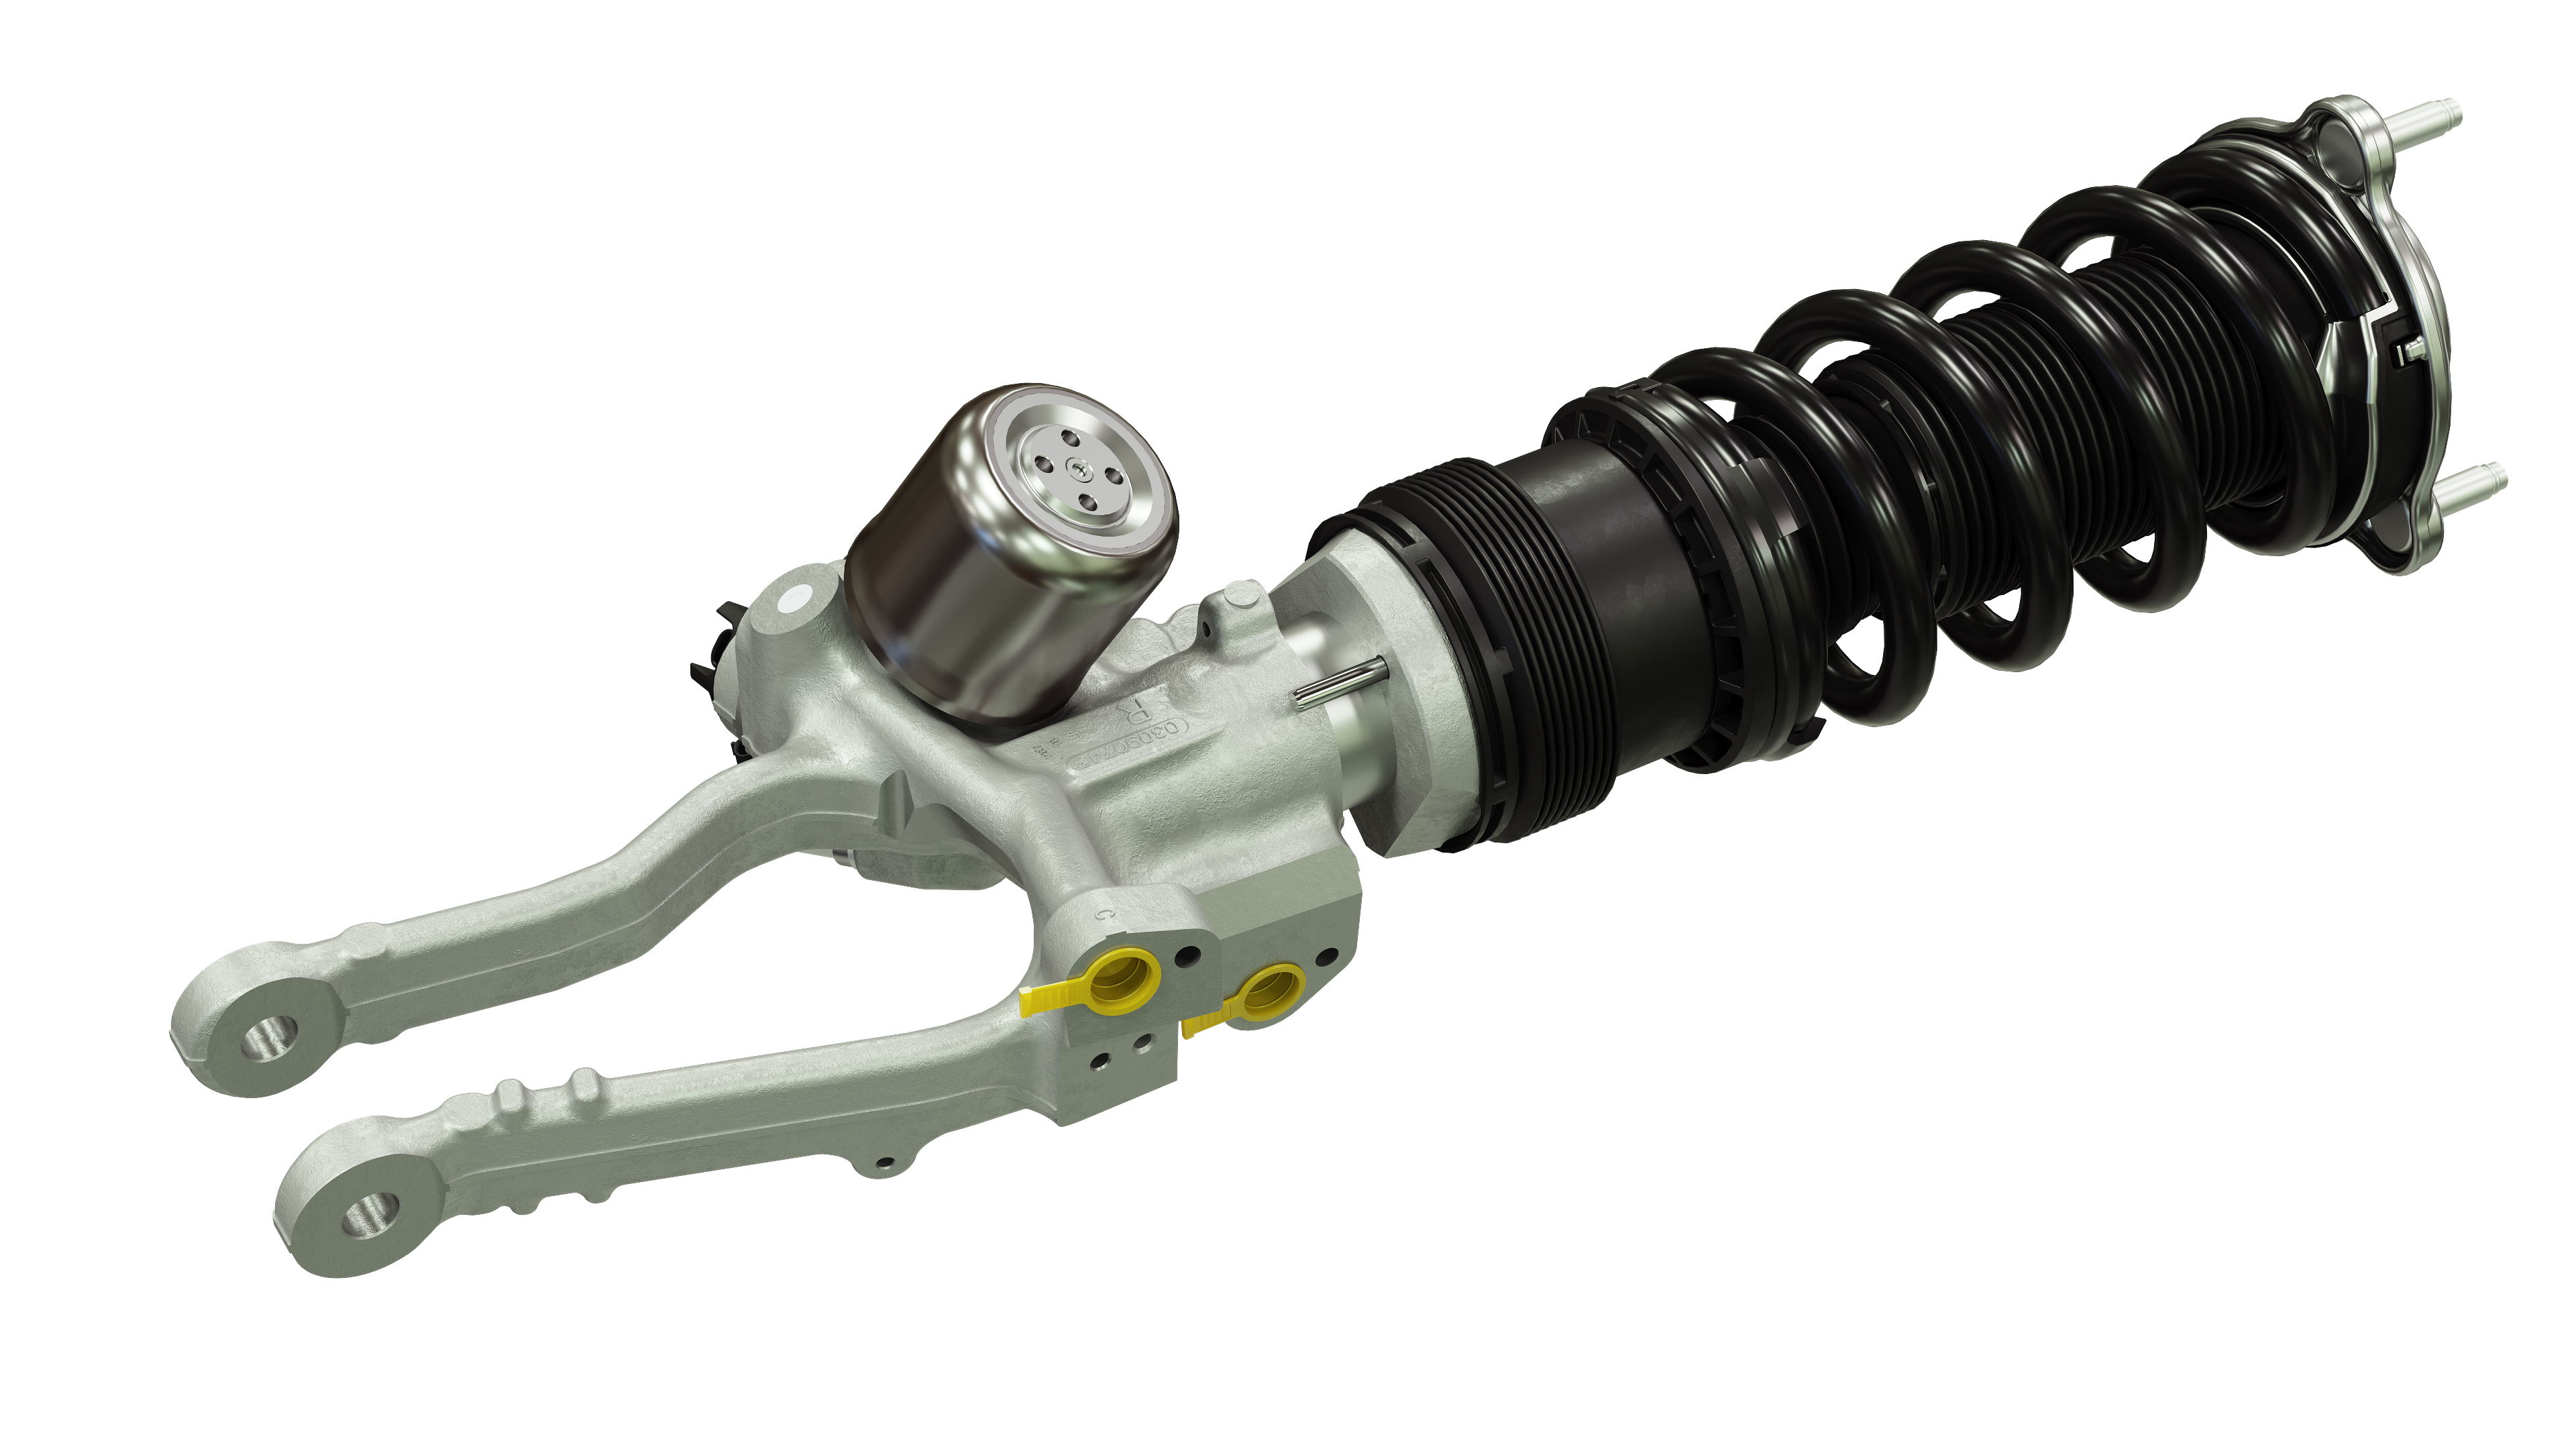 The CVSA2/Kinetic suspension combines all the benefits of CVSA2 technology with an innovative, active roll control system that reduces vehicle weight by eliminating the need for anti-roll bars. Together the systems provide exceptional traction, steering response, brake balance and comfort as well as front lifting functionality for increased ground clearance.